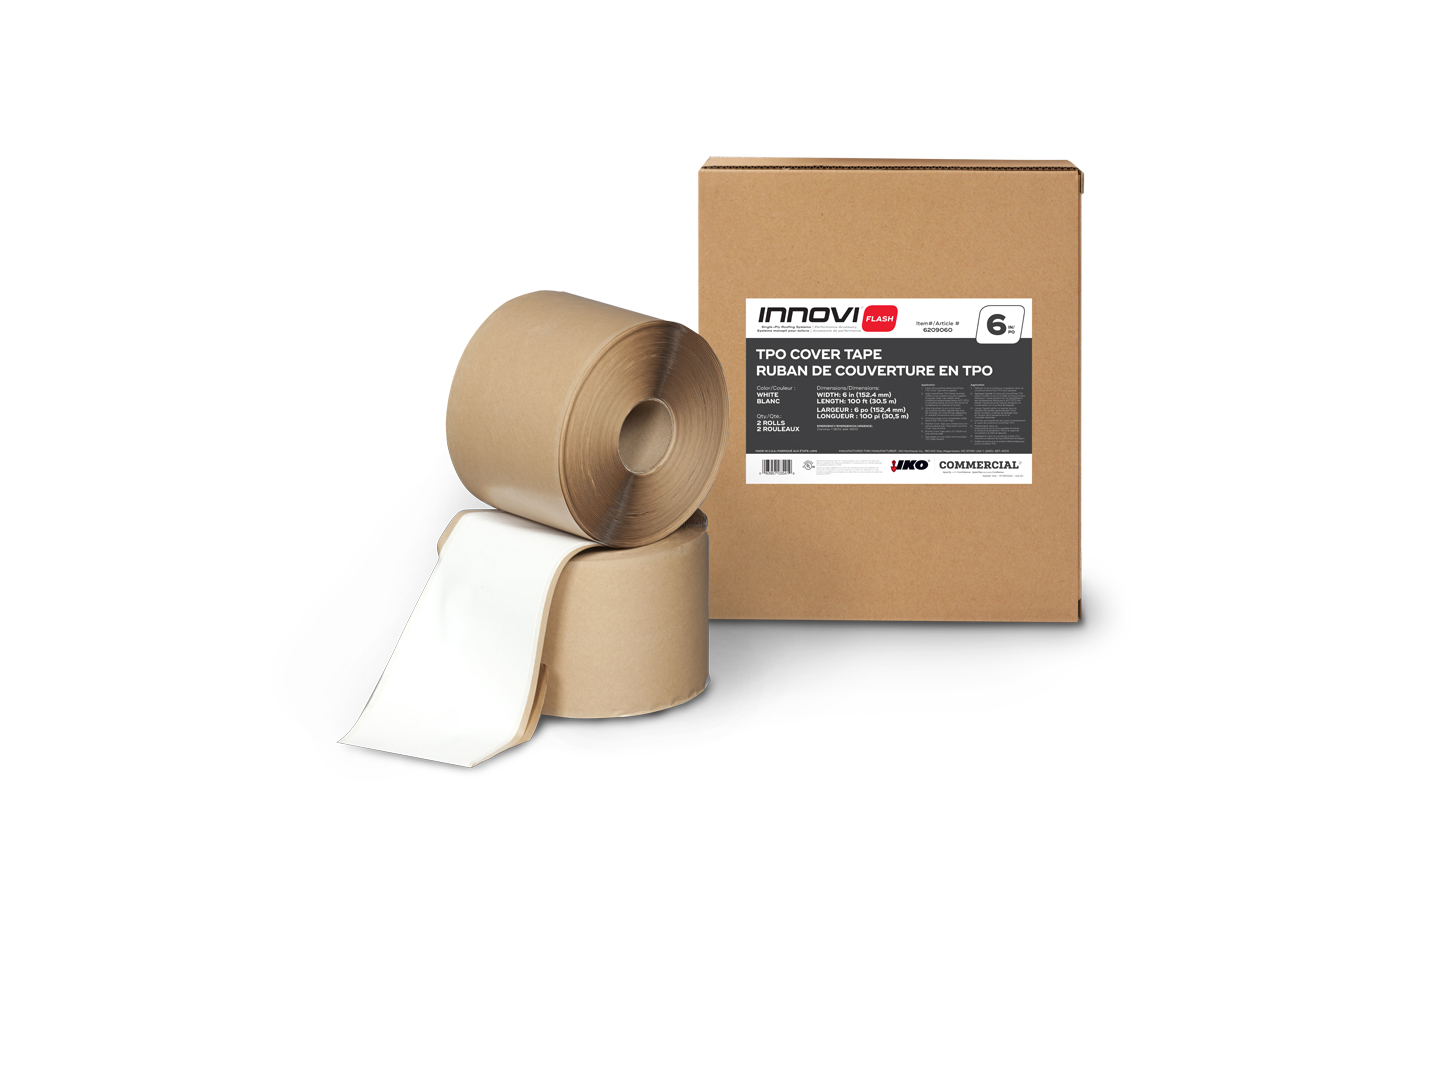 INNOVFLASH-COVER-TAPE-BOX